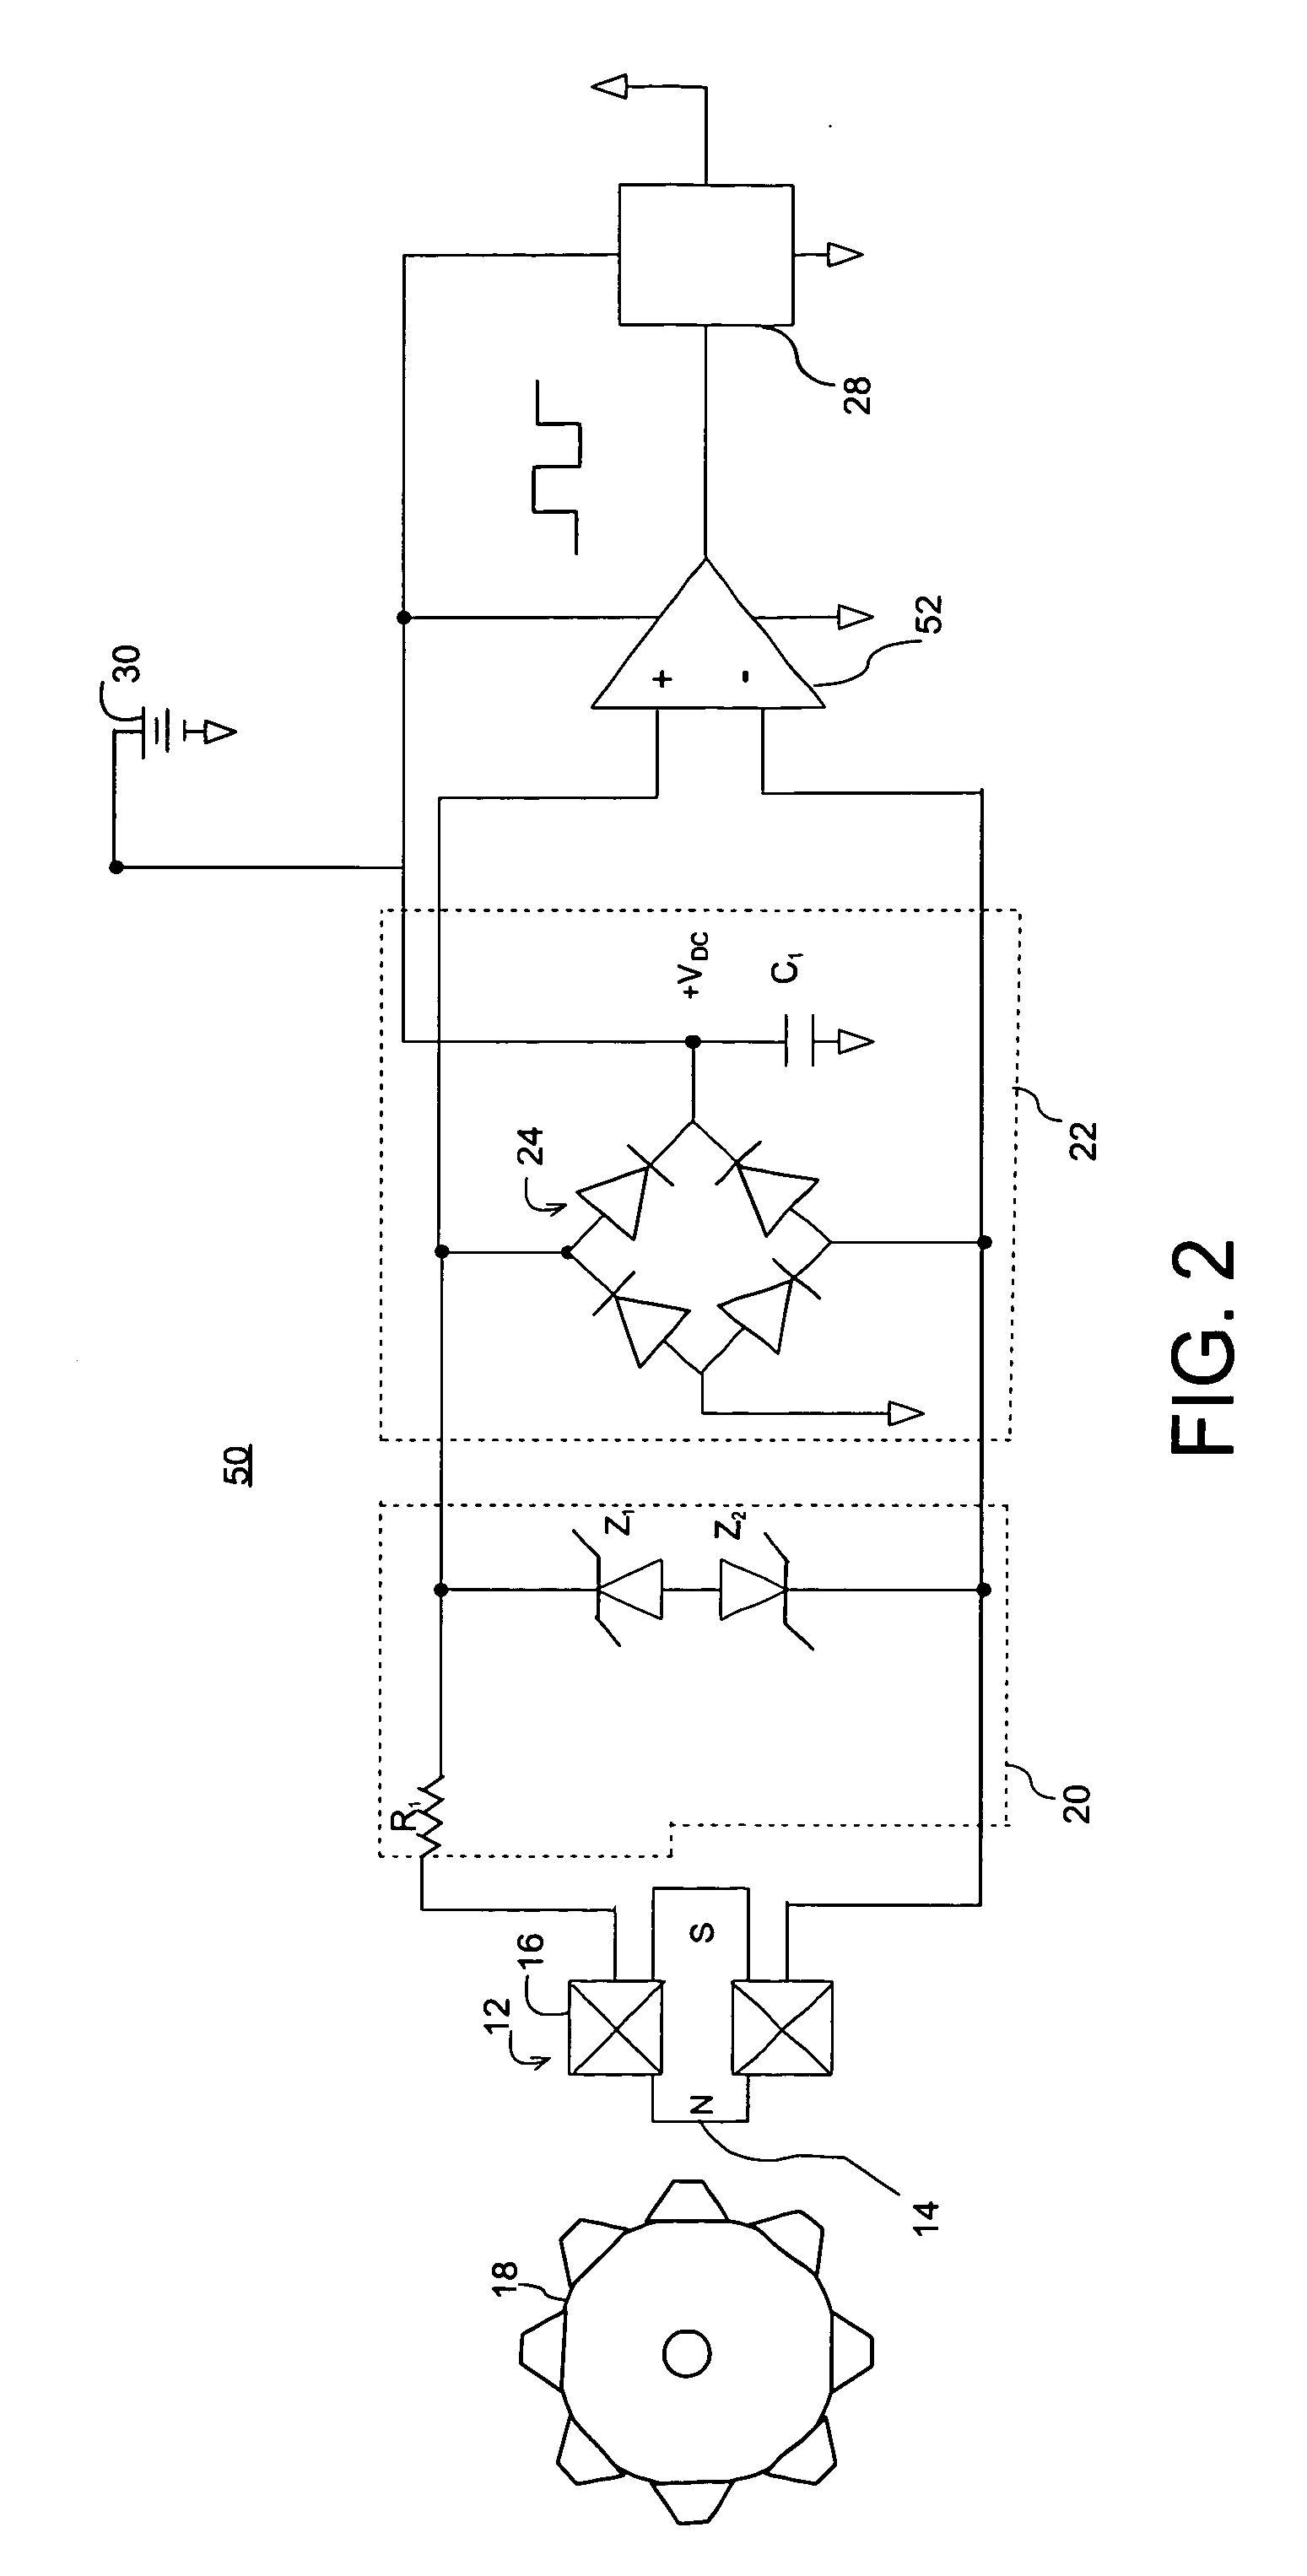 Self-powered wireless sensor assembly for sensing angular position of the engine crankshaft in a vehicle